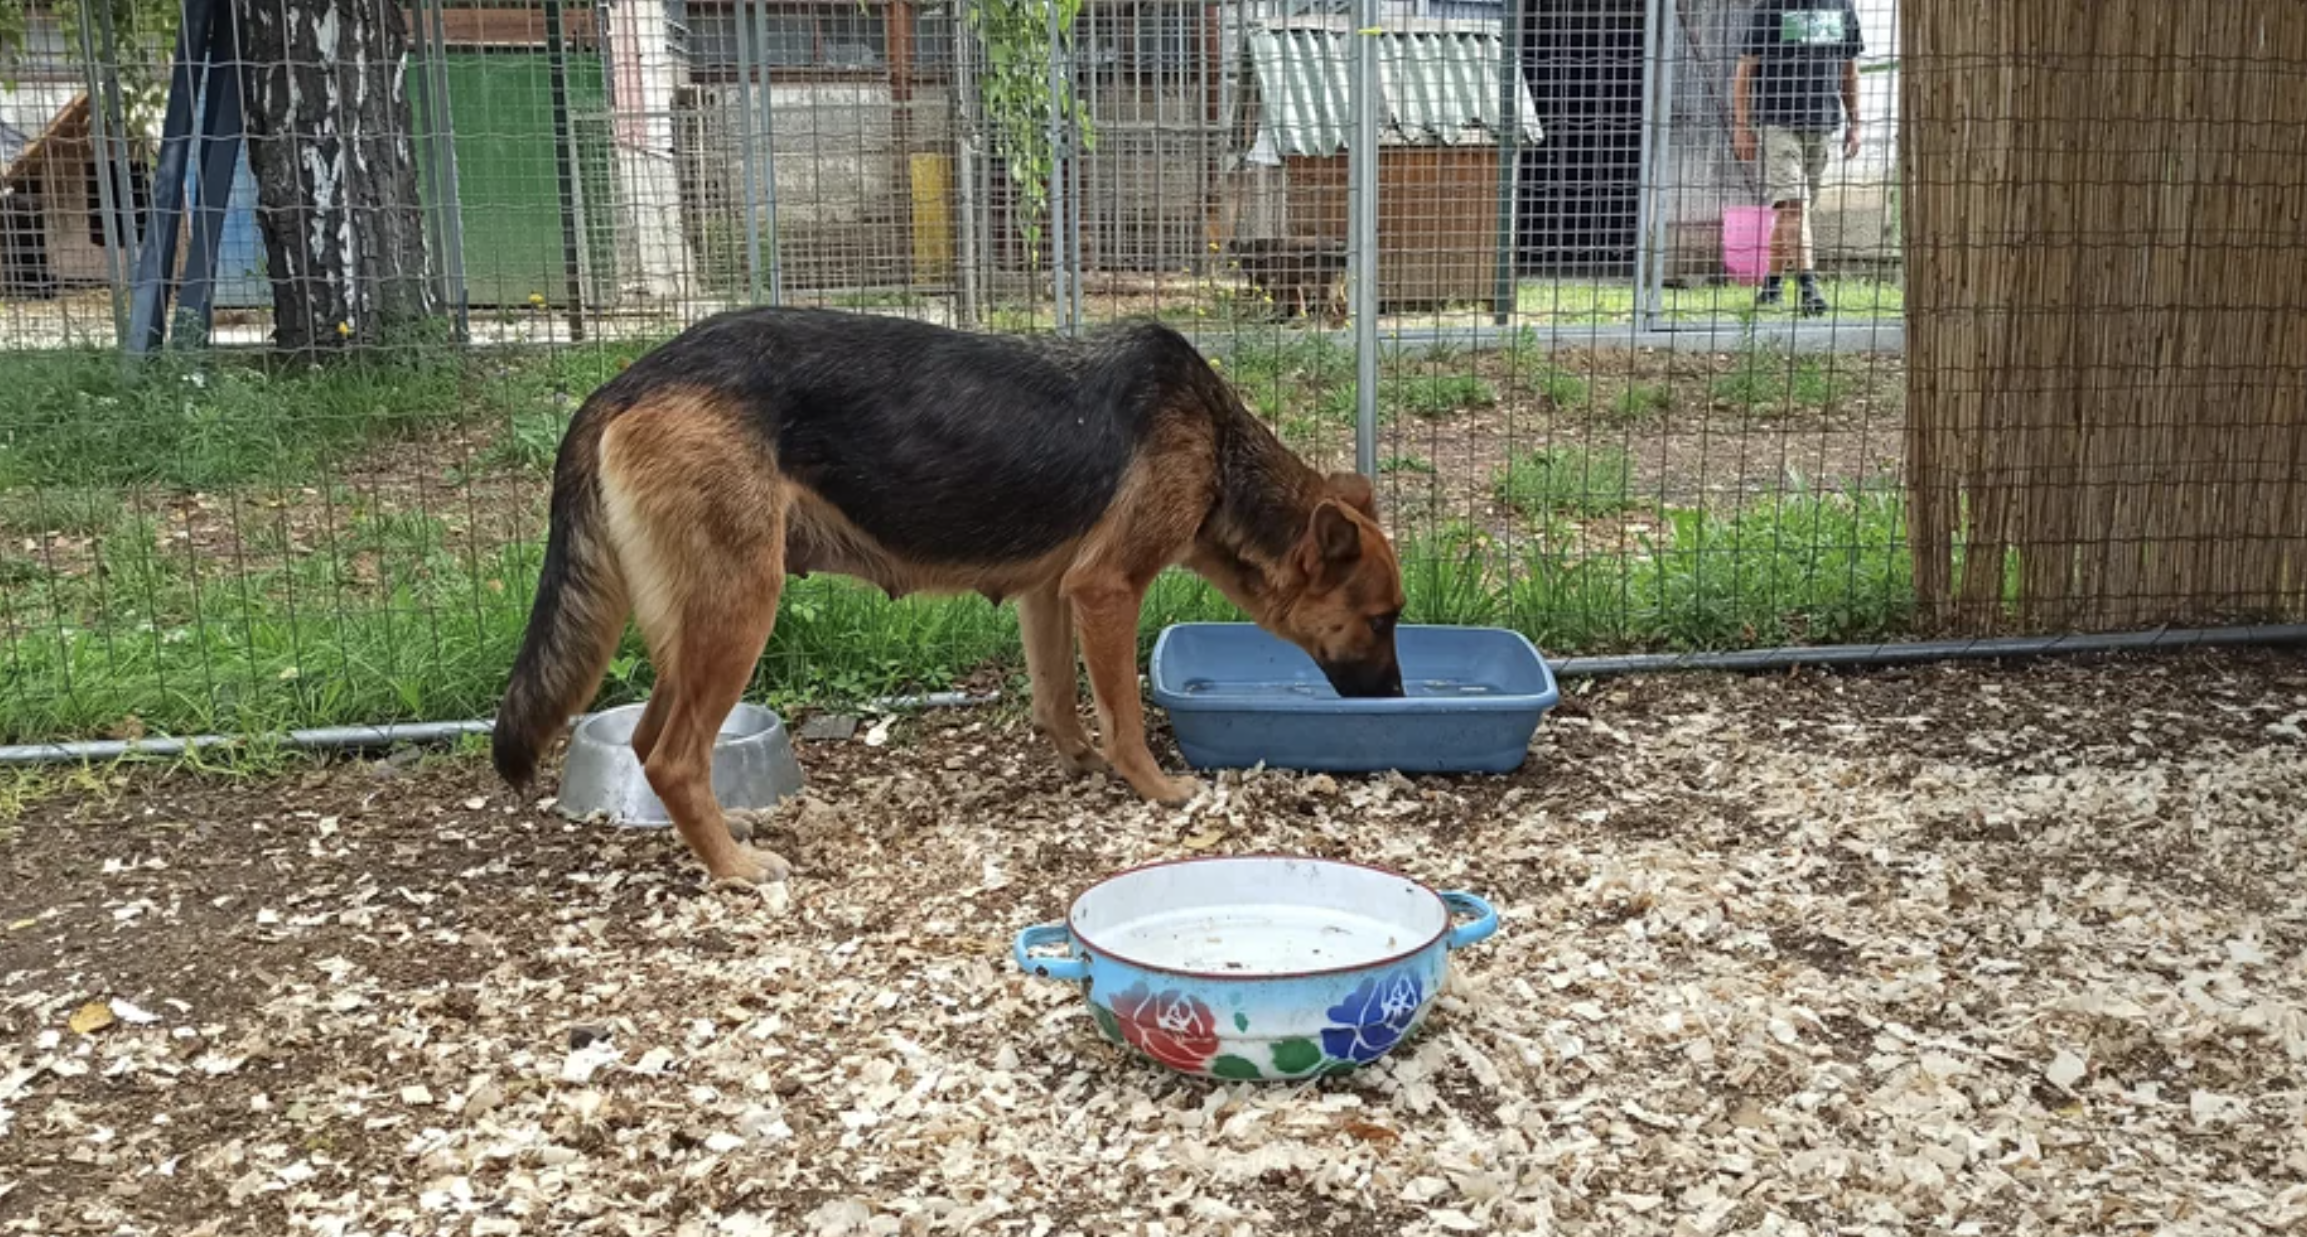 A German Shepherd drinking water from a bowl in an outdoor enclosure with a fence in the background